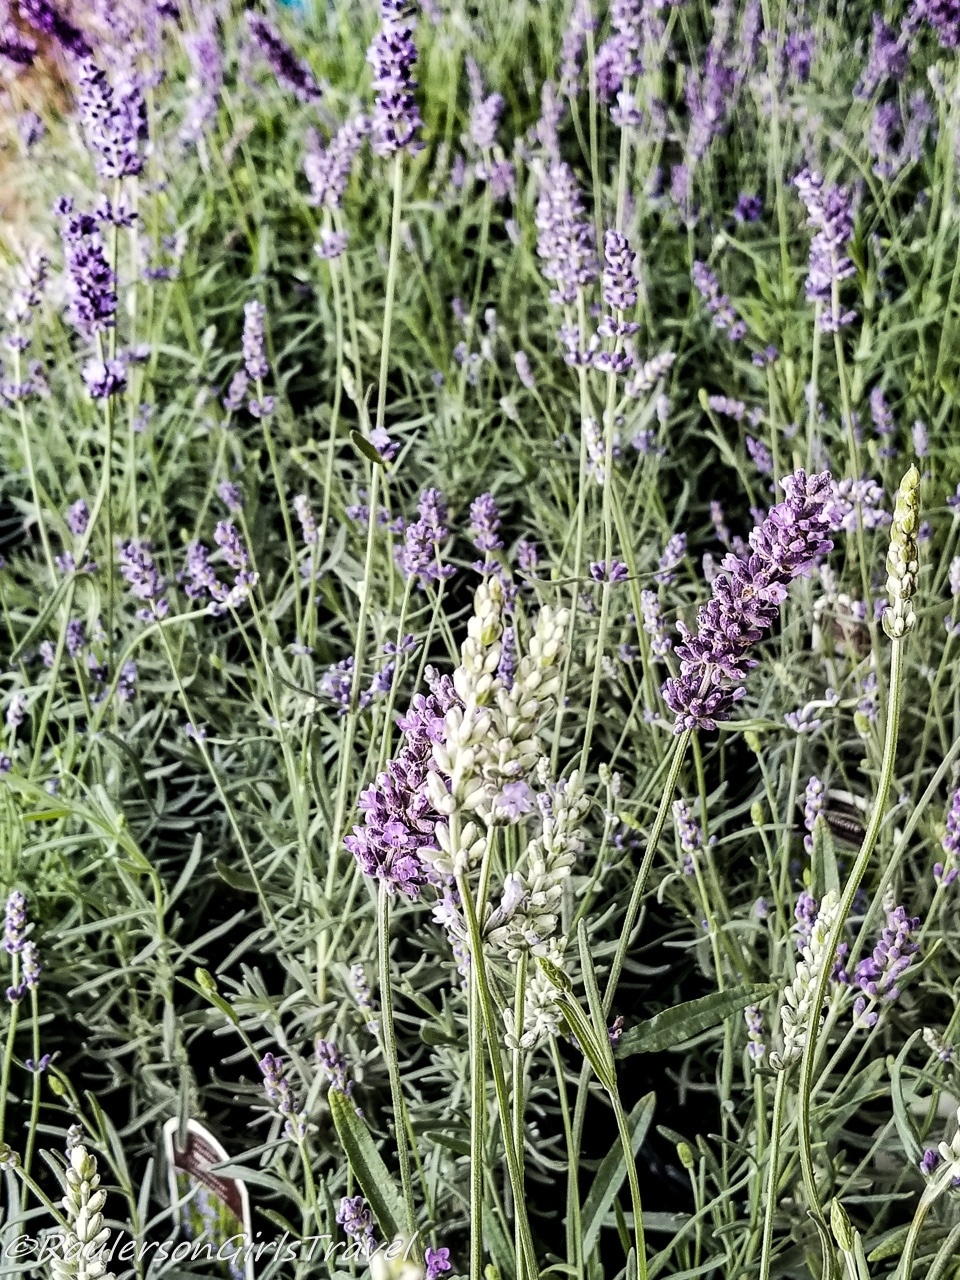 White and purple lavender blossoms in a field